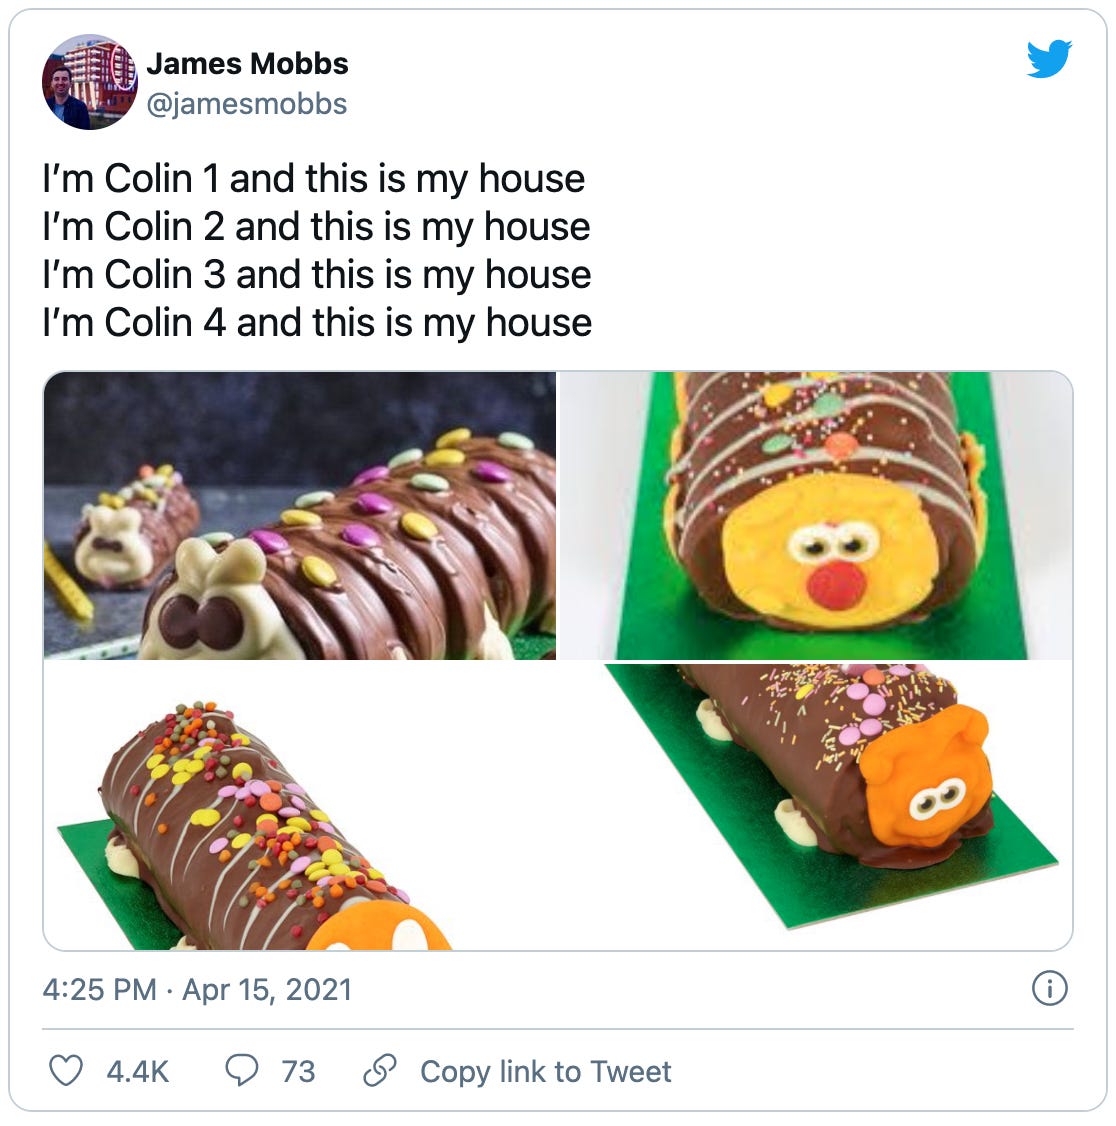 Tweet by @jamesmobbs that reads: I’m Colin 1 and this is my house, I’m Colin 2 and this is my house, I’m Colin 3 and this is my house, I’m Colin 4 and this is my house. Followed by four pictures of different Colin the Caterpillar cakes.